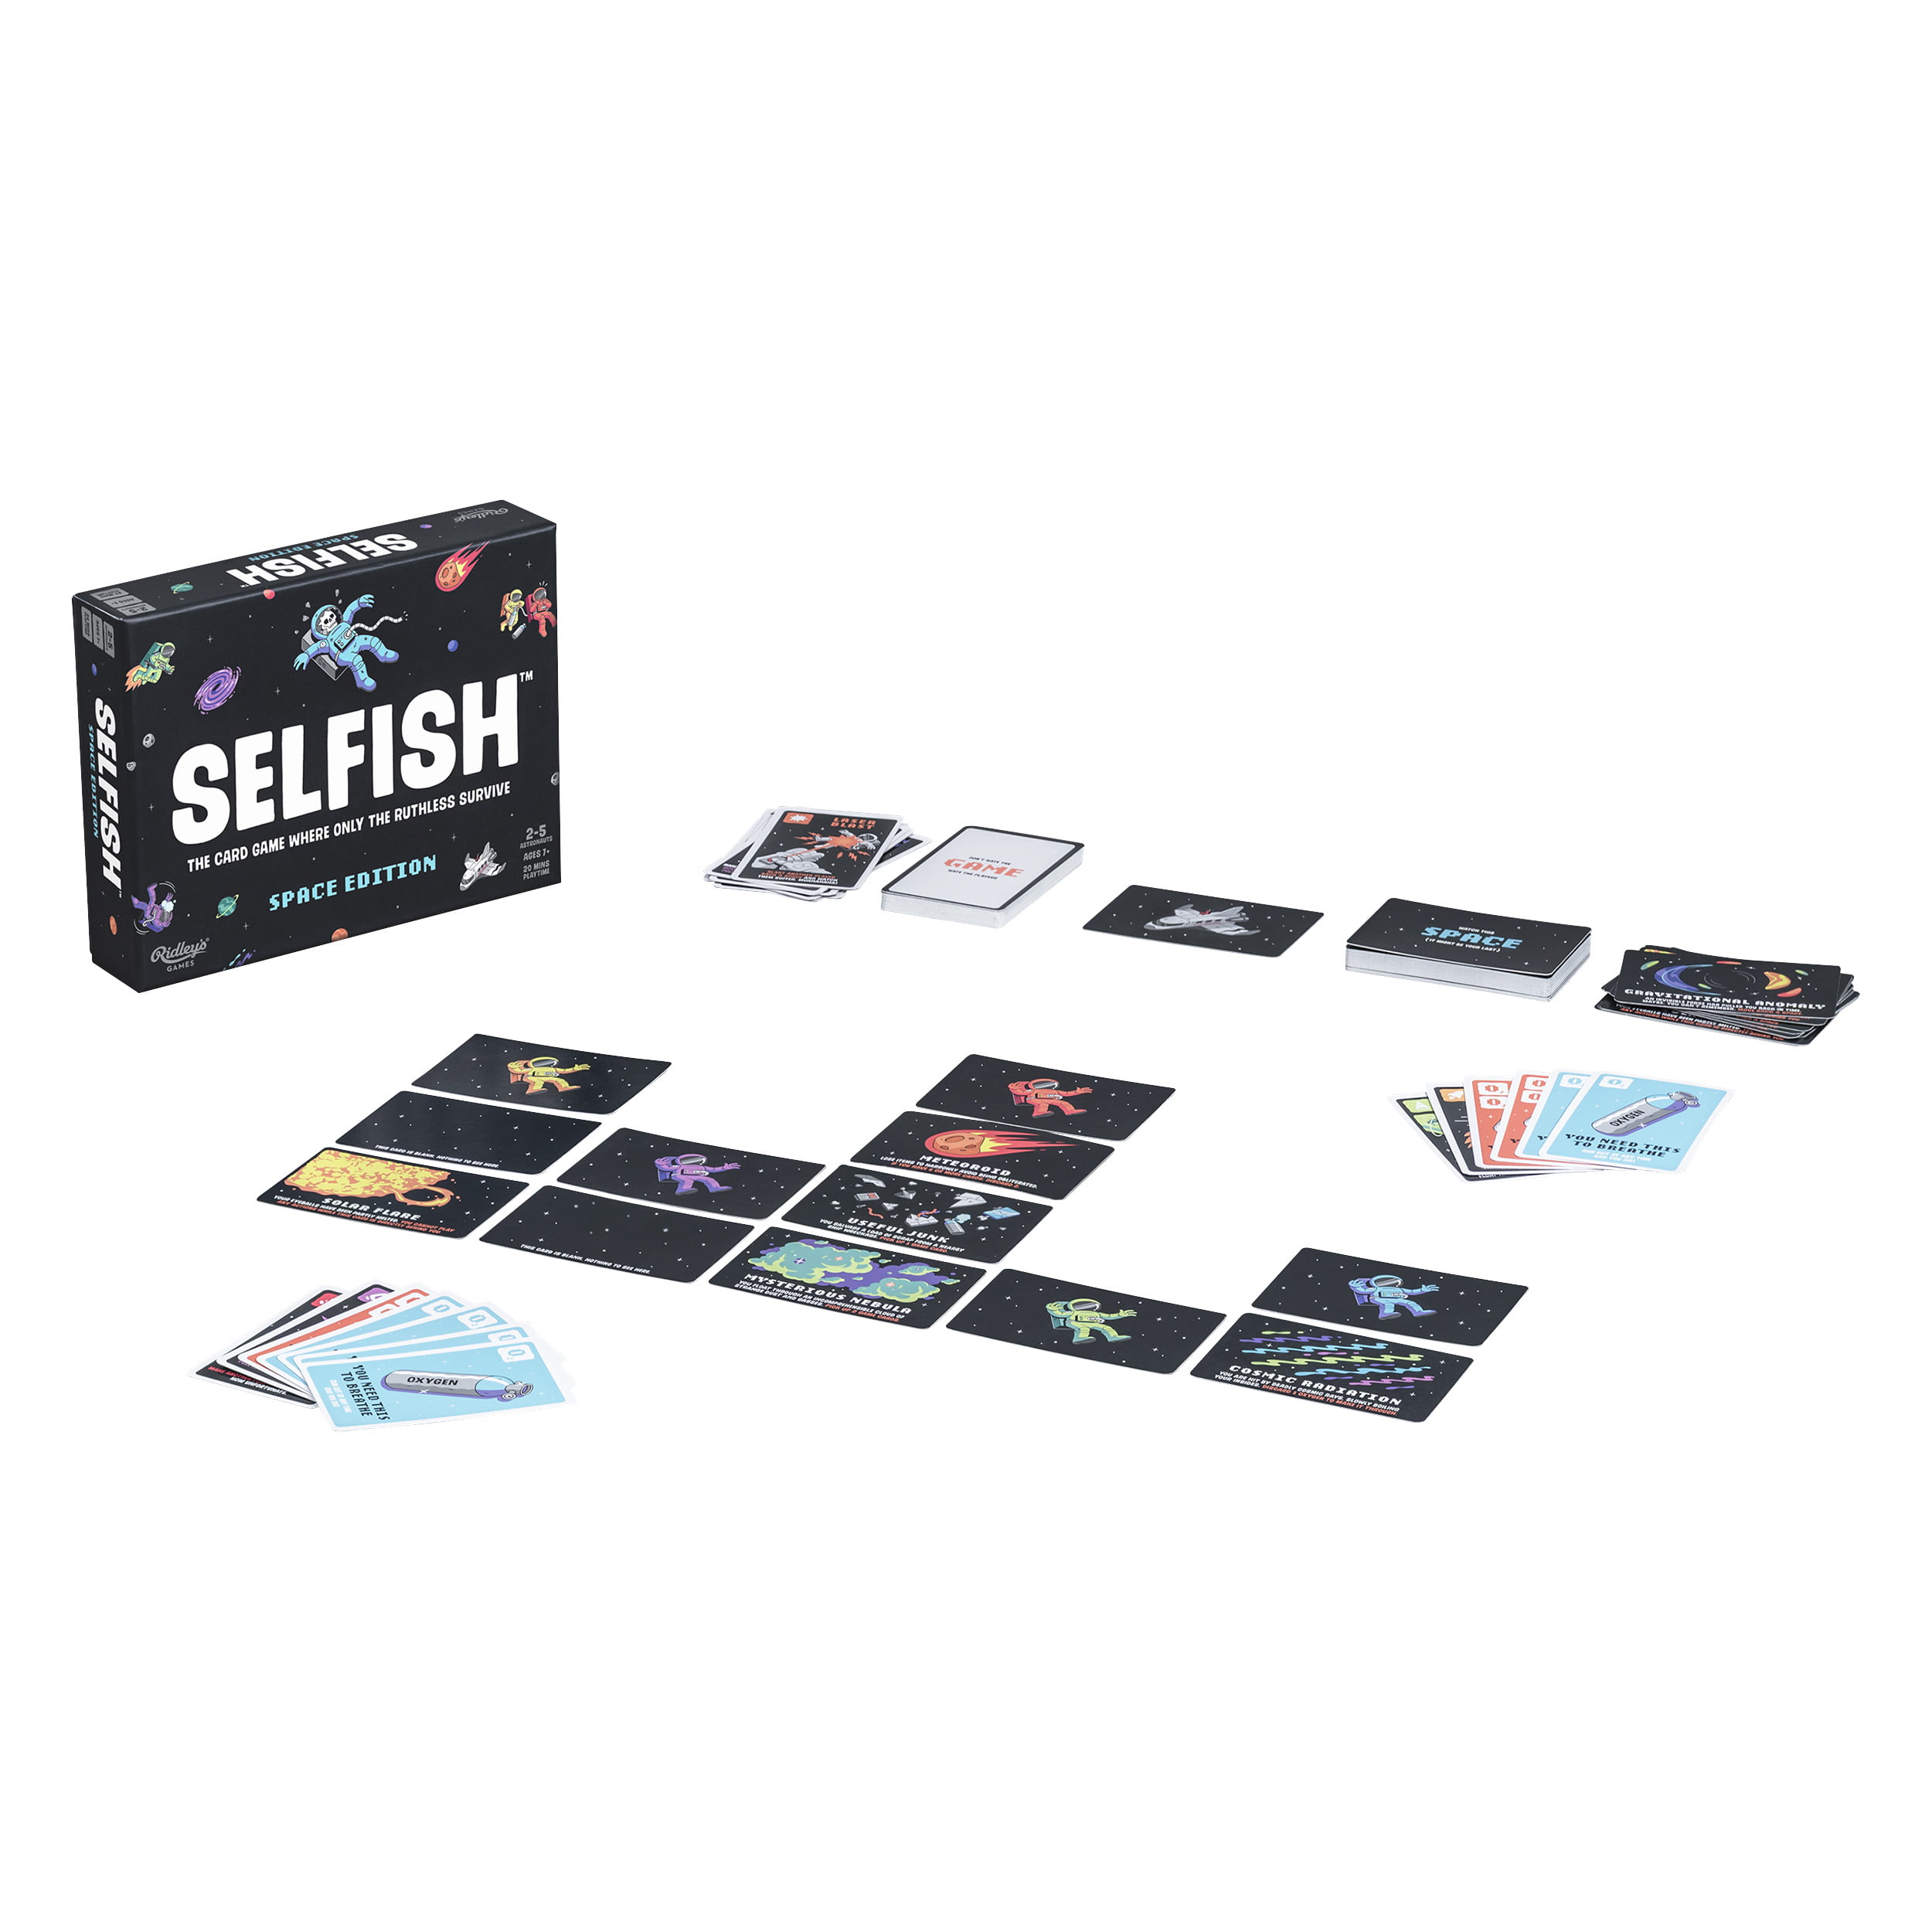 Selfish Space Edition Strategy Game Ridley's Games 2018 Complete F1 